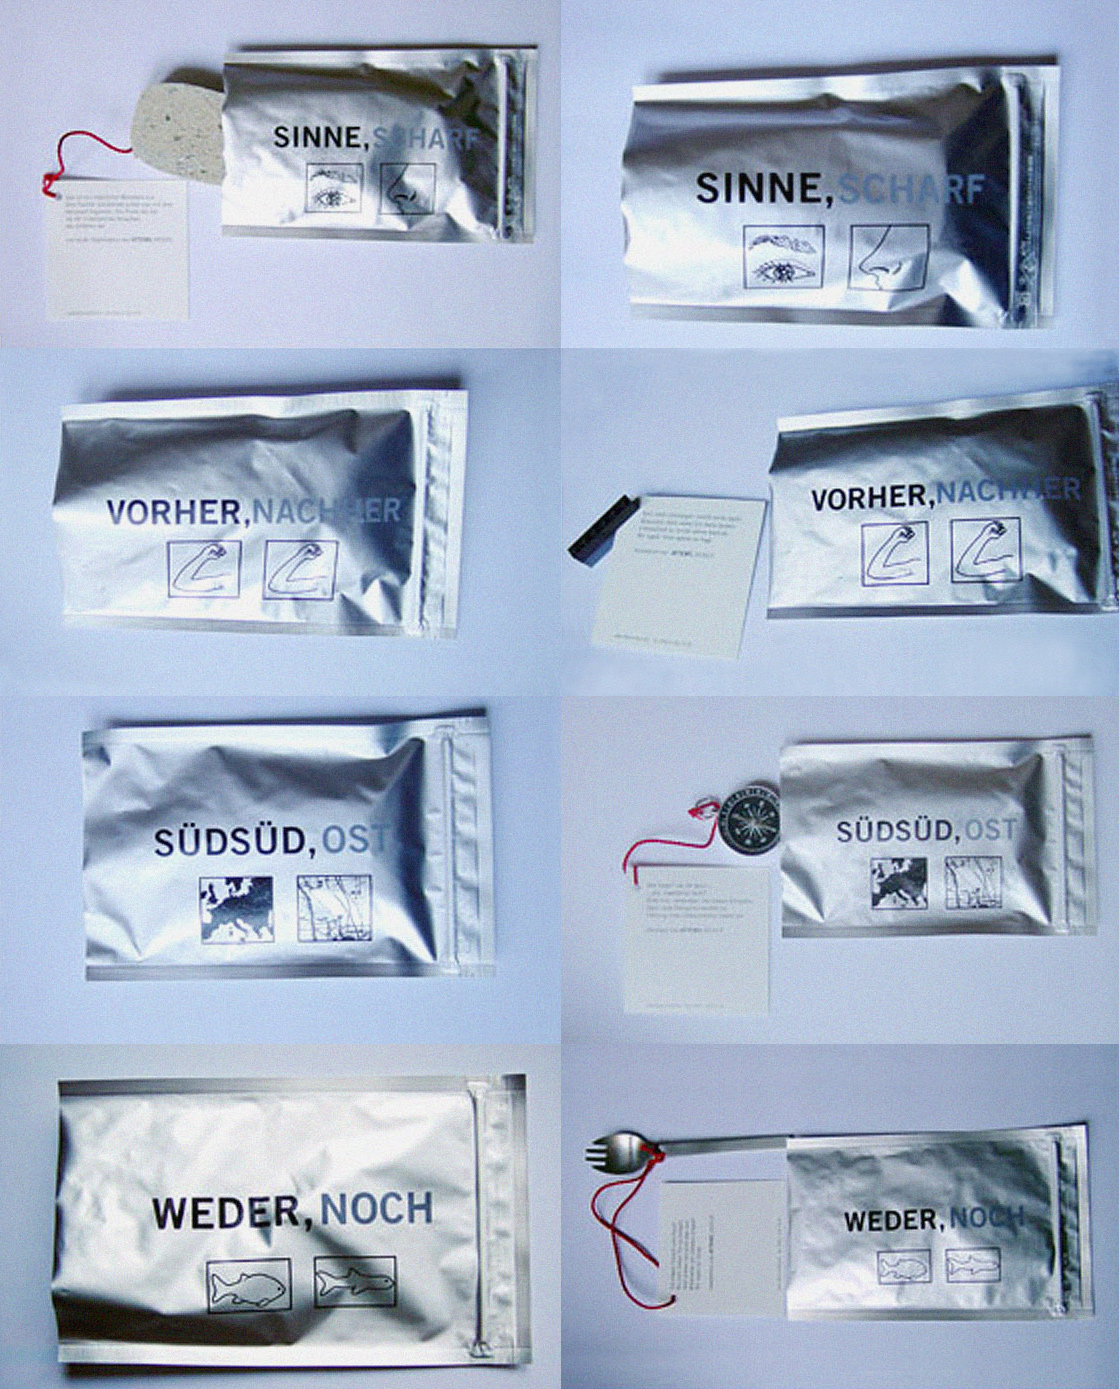 Various silver coloured zip-lock bags. Each bag contains an item with a card. 2 words which resemble logo and illustrations are printed on each bag.